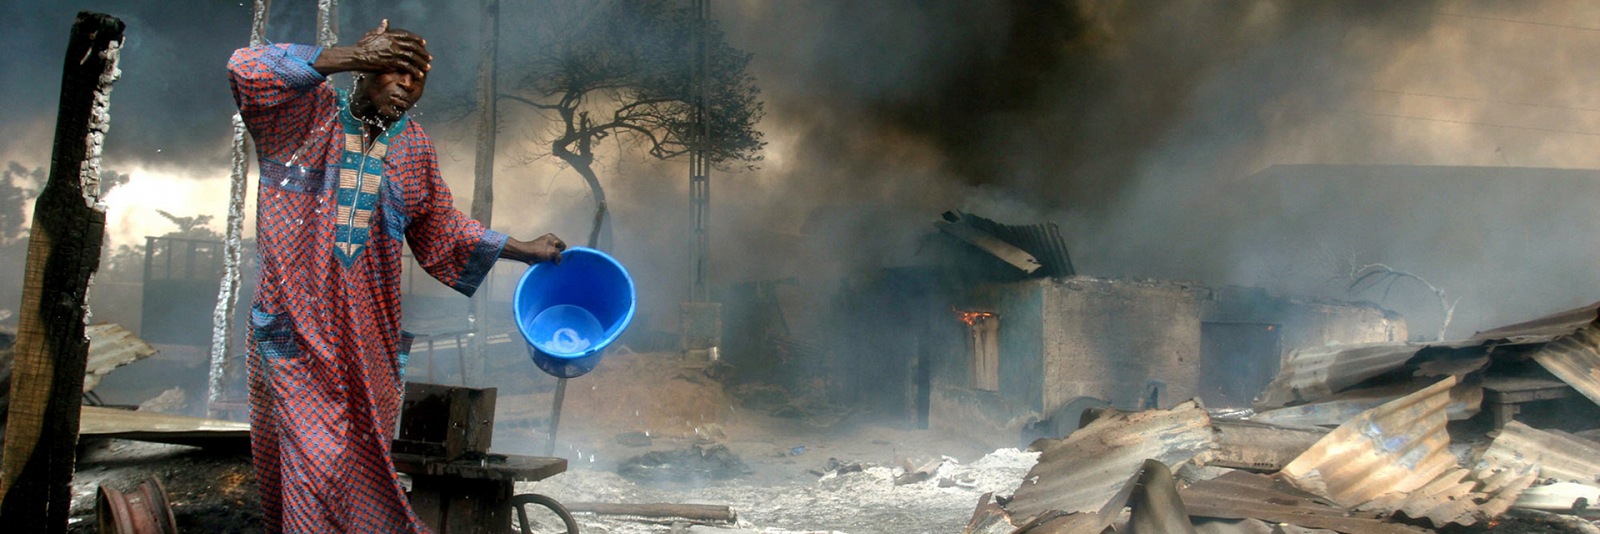 Festival Photo La Gacilly 2017, 3 giugno - 30 settembre 2017. Foto: A man rinses soot from his face at the scene of a gas pipeline explosion near Nigeria's commercial capital Lagos in this December 26, 2006 file photo. Up to 500 people were burned alive when fuel from a vandalised pipeline exploded in Nigeria's largest city. Hundreds of residents of the Abule Egba district went to scoop fuel using plastic containers after thieves punctured the underground pipeline overnight to siphon fuel into a road tanker, locals said. Akintunde Akinleye/Reuters.